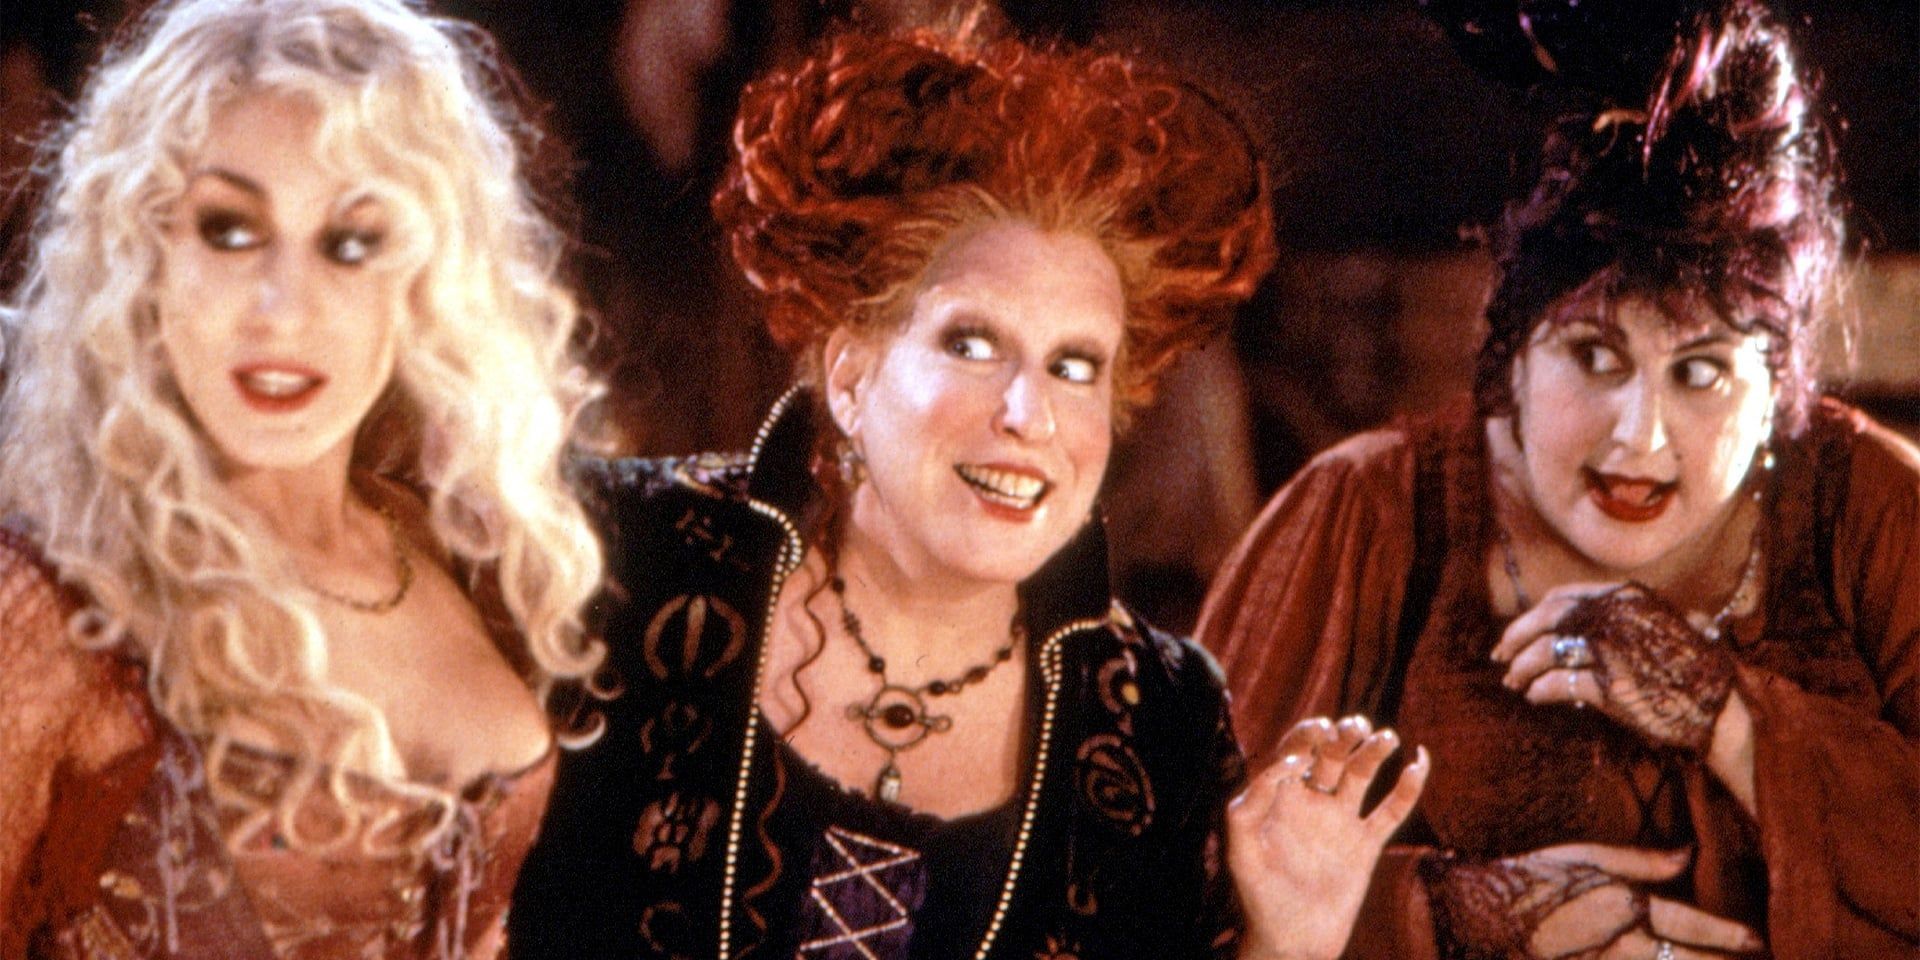 A still from the family film Hocus Pocus.